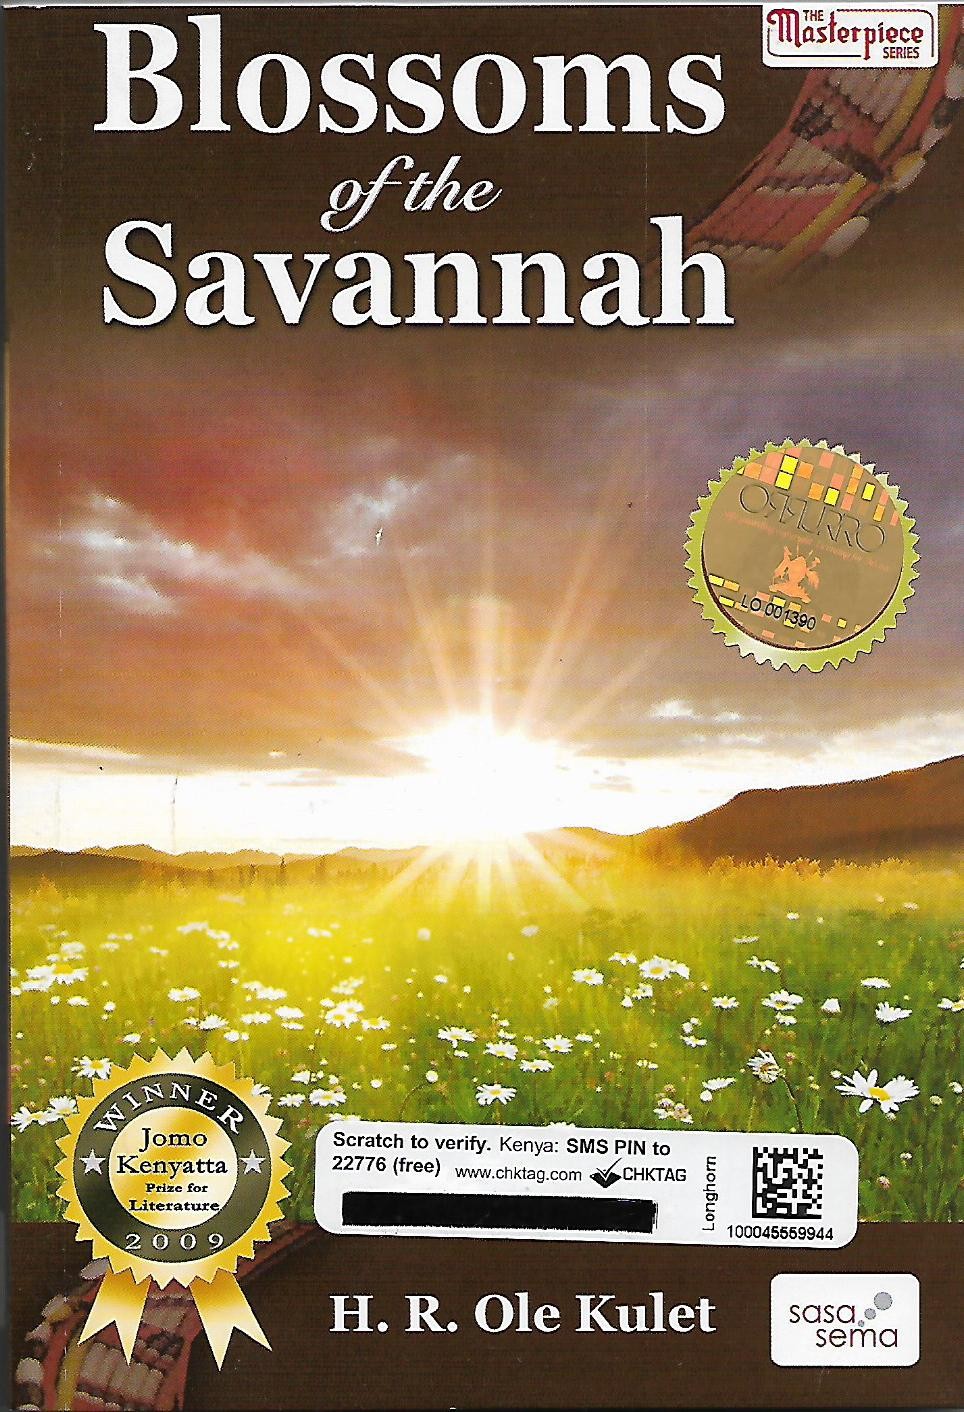 general essay questions in blossoms of the savannah